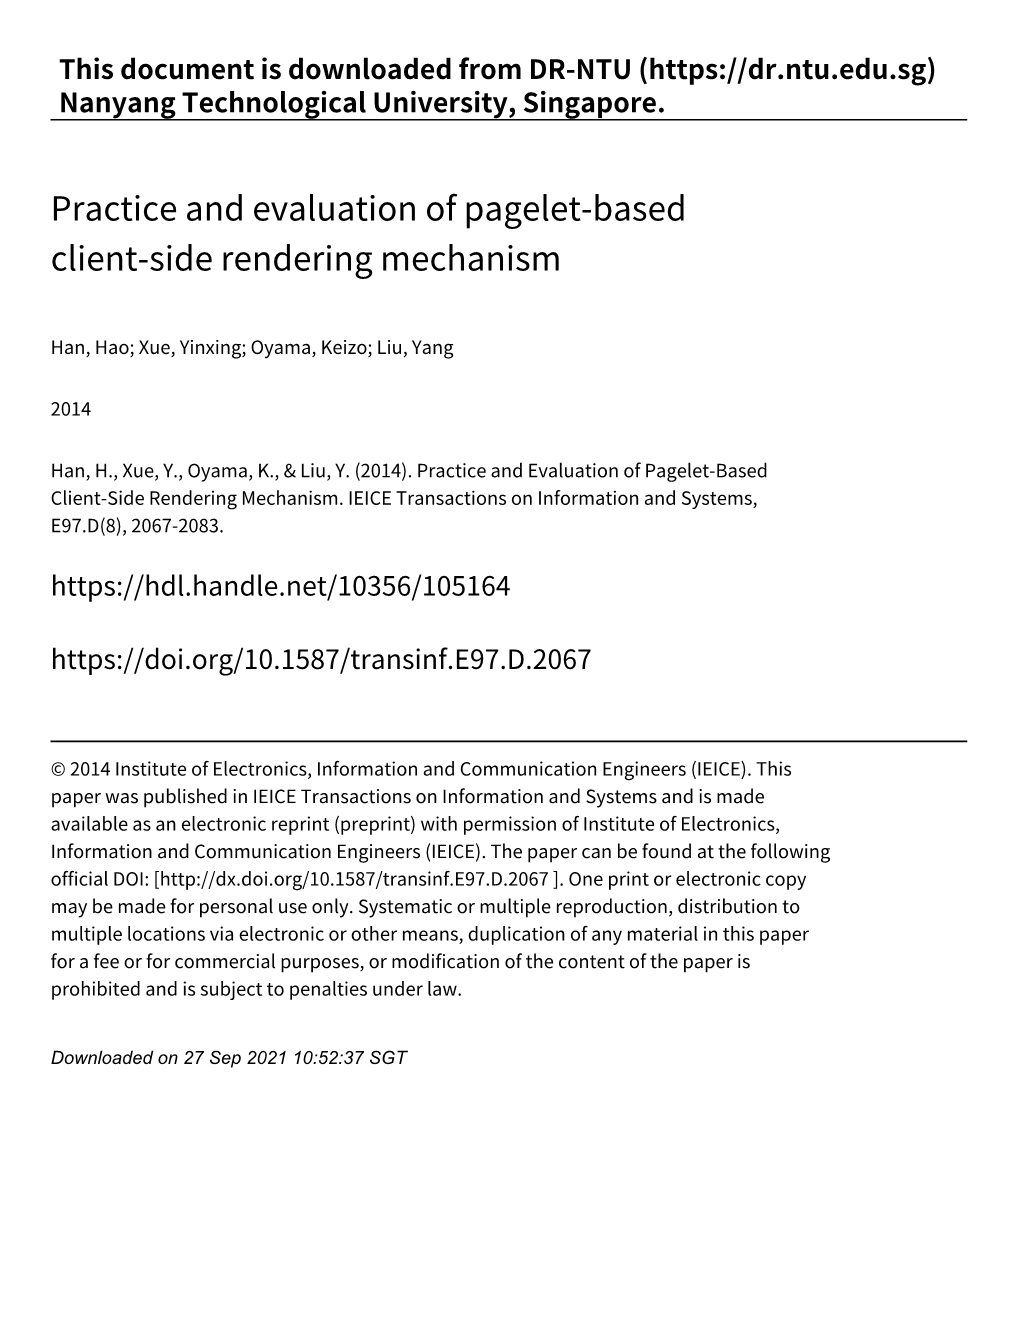 Practice and Evaluation of Pagelet‑Based Client‑Side Rendering Mechanism